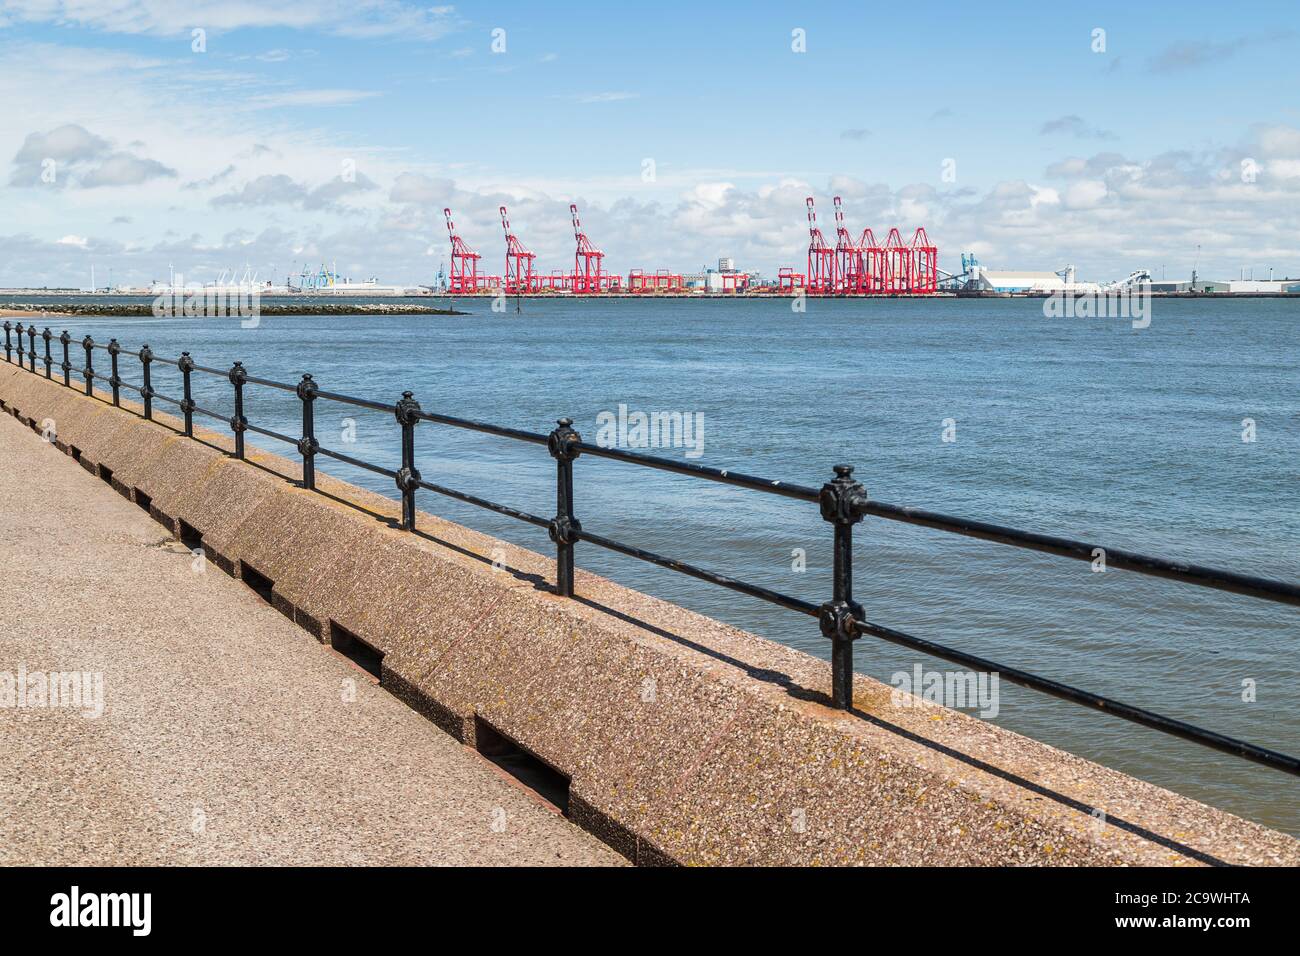 Overlooking the railings on the promenade at New Brighton near Liverpool towards the large red cranes at Seafort dock. Stock Photo